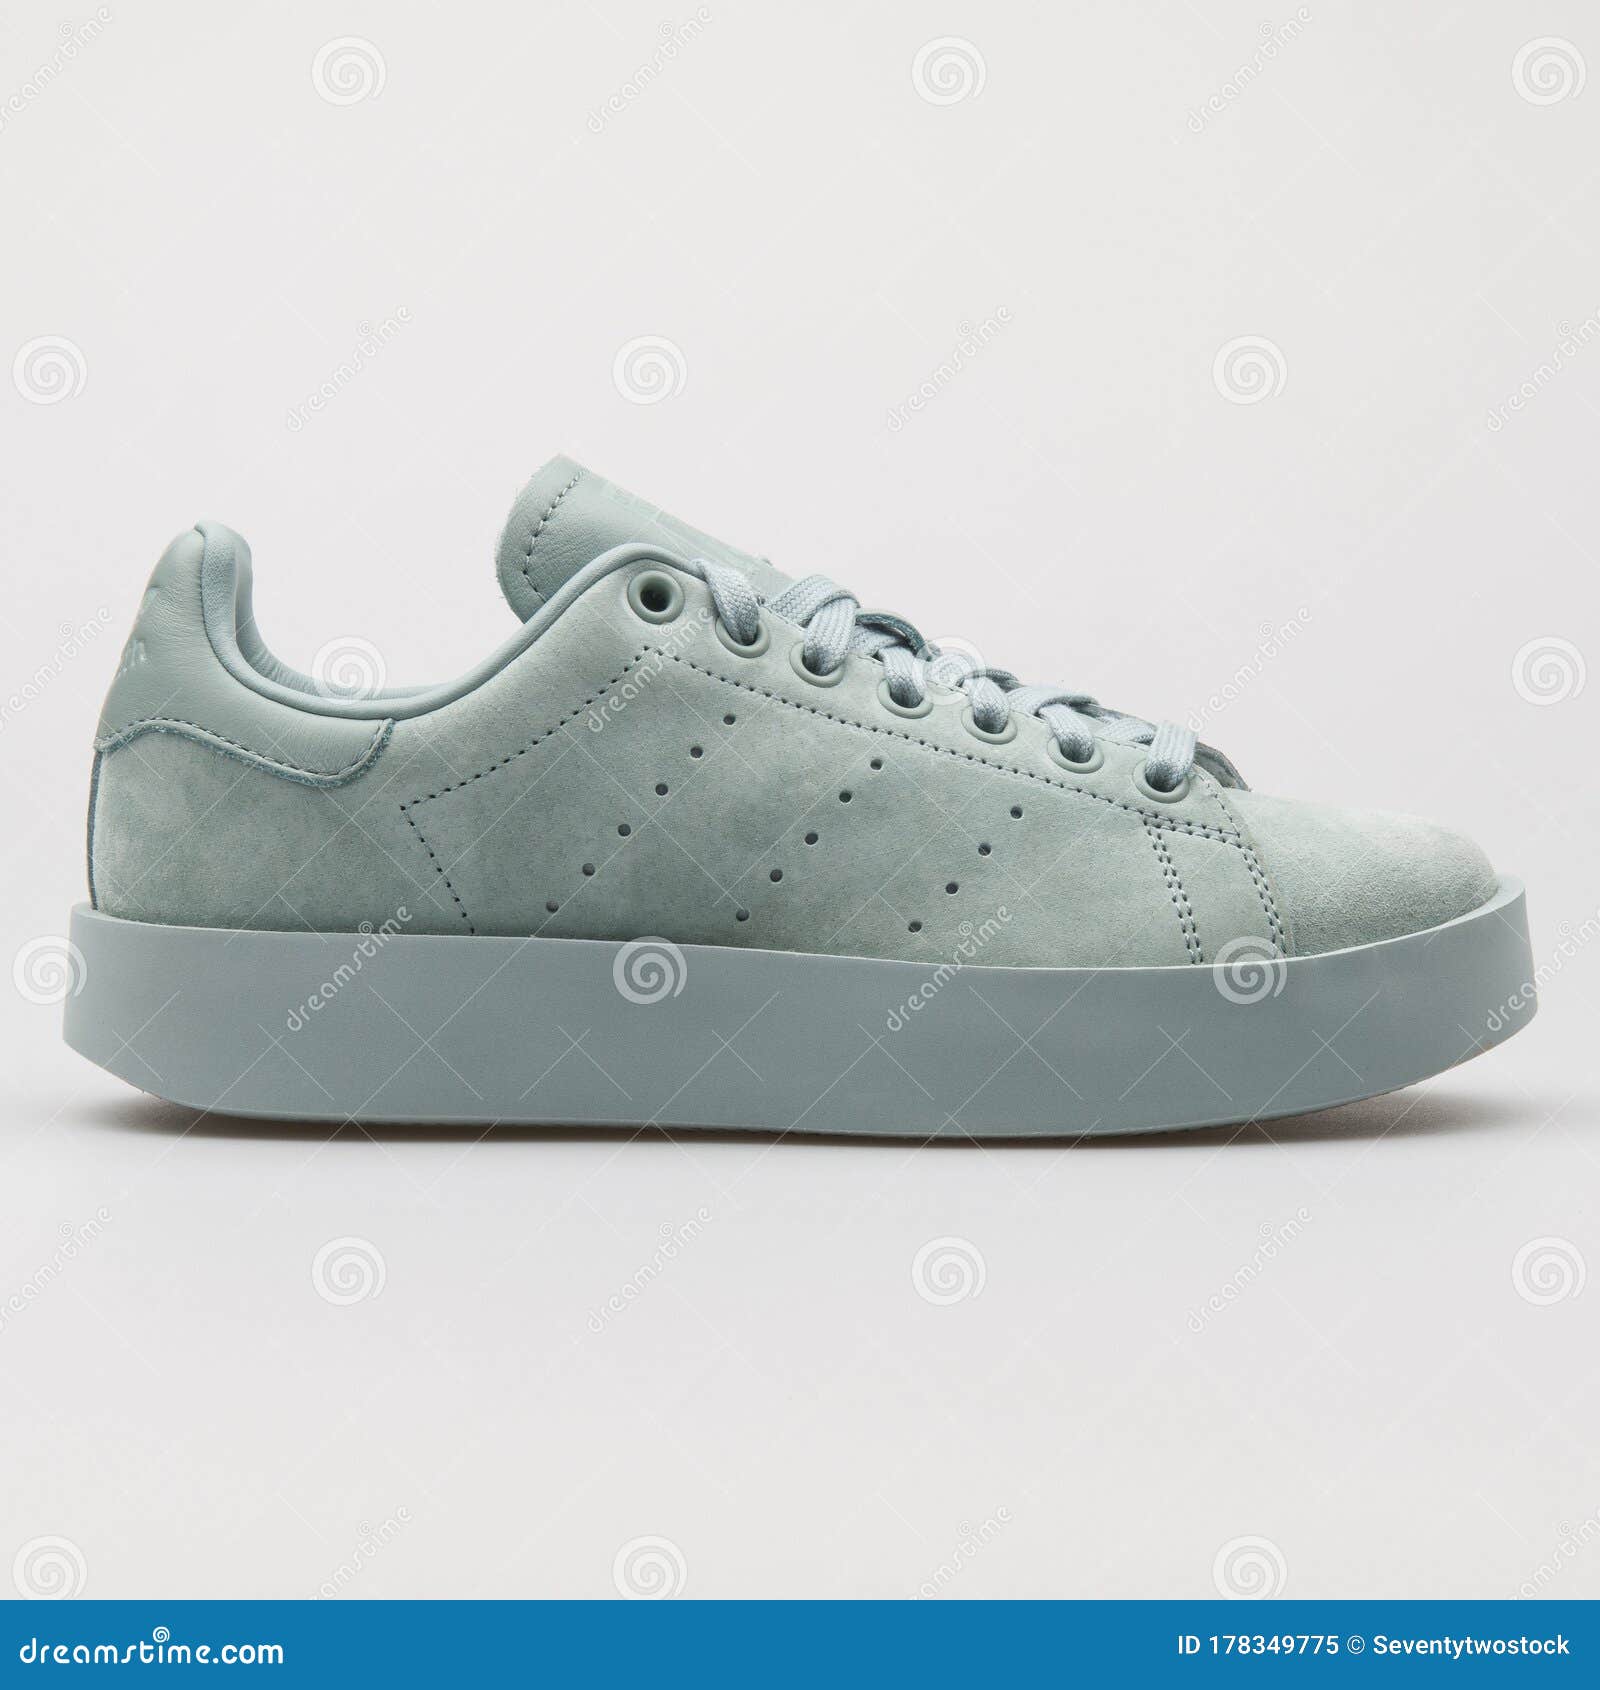 Adidas Stan Smith Bold Green Sneaker Editorial Image Image of colour: 178349775